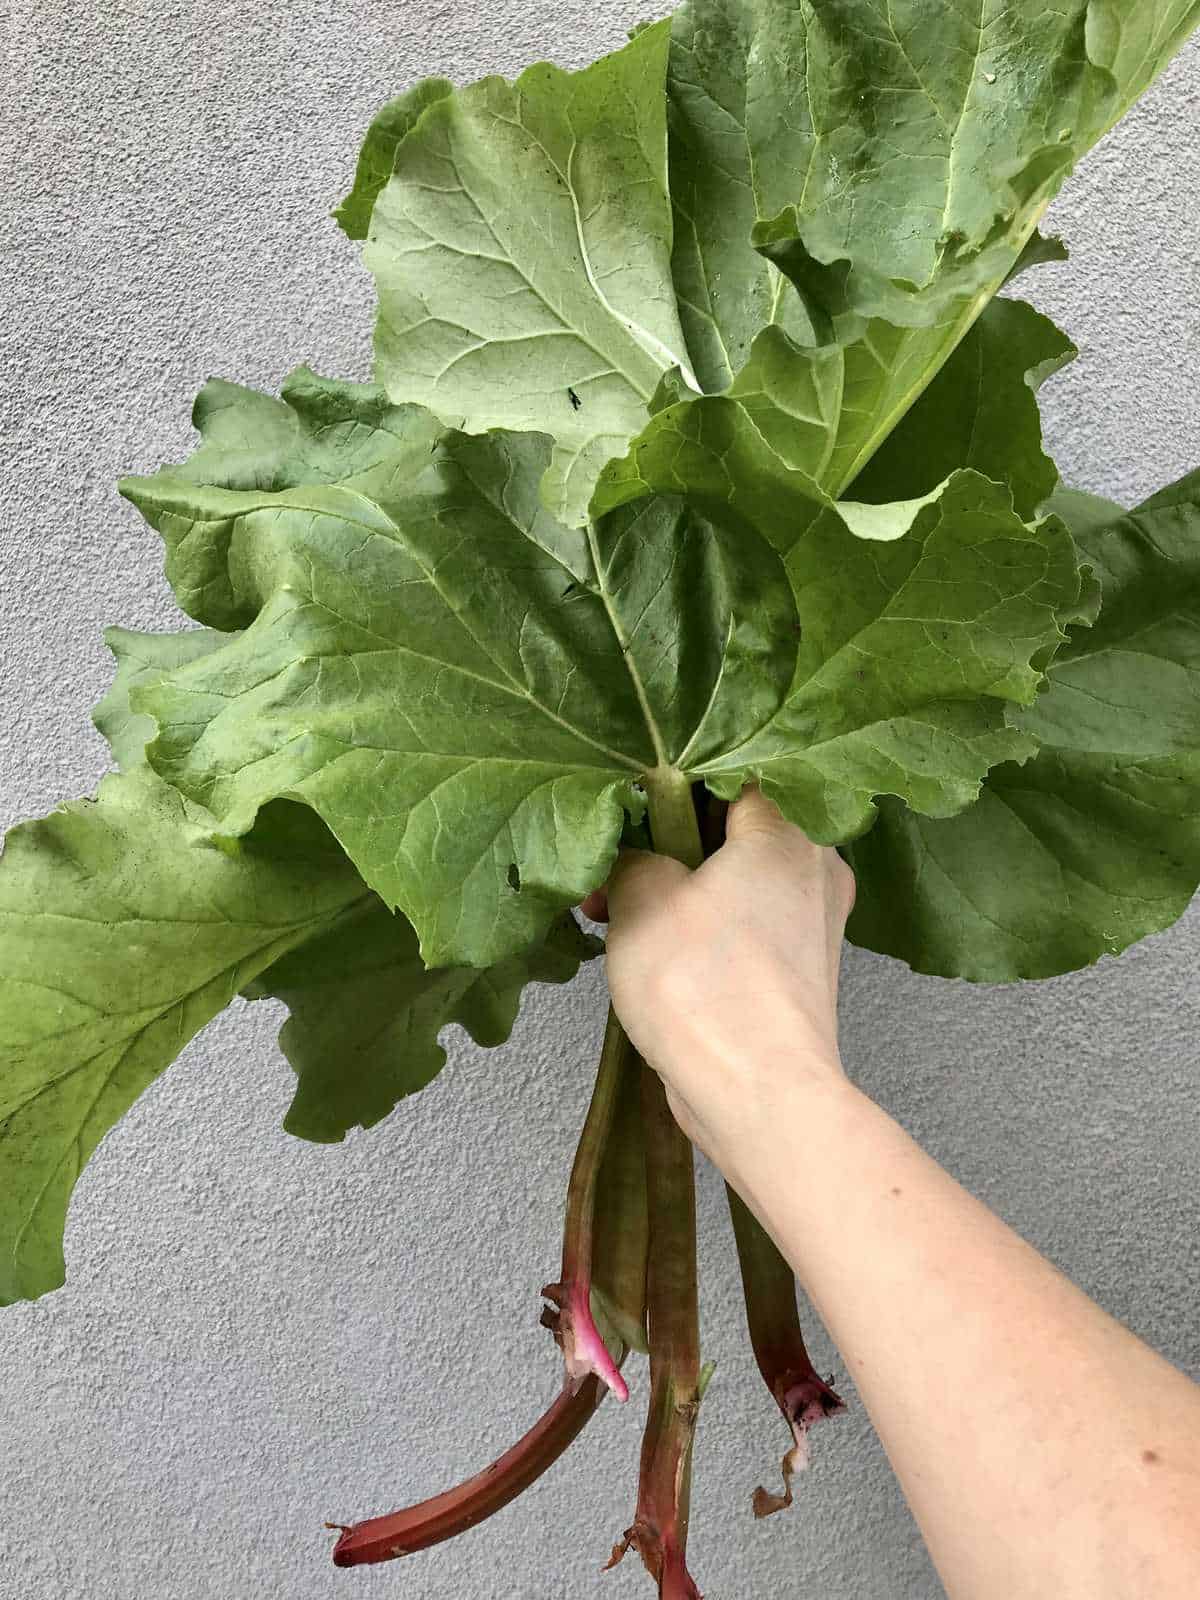 A bunch of fresh rhubarb held up in the air.